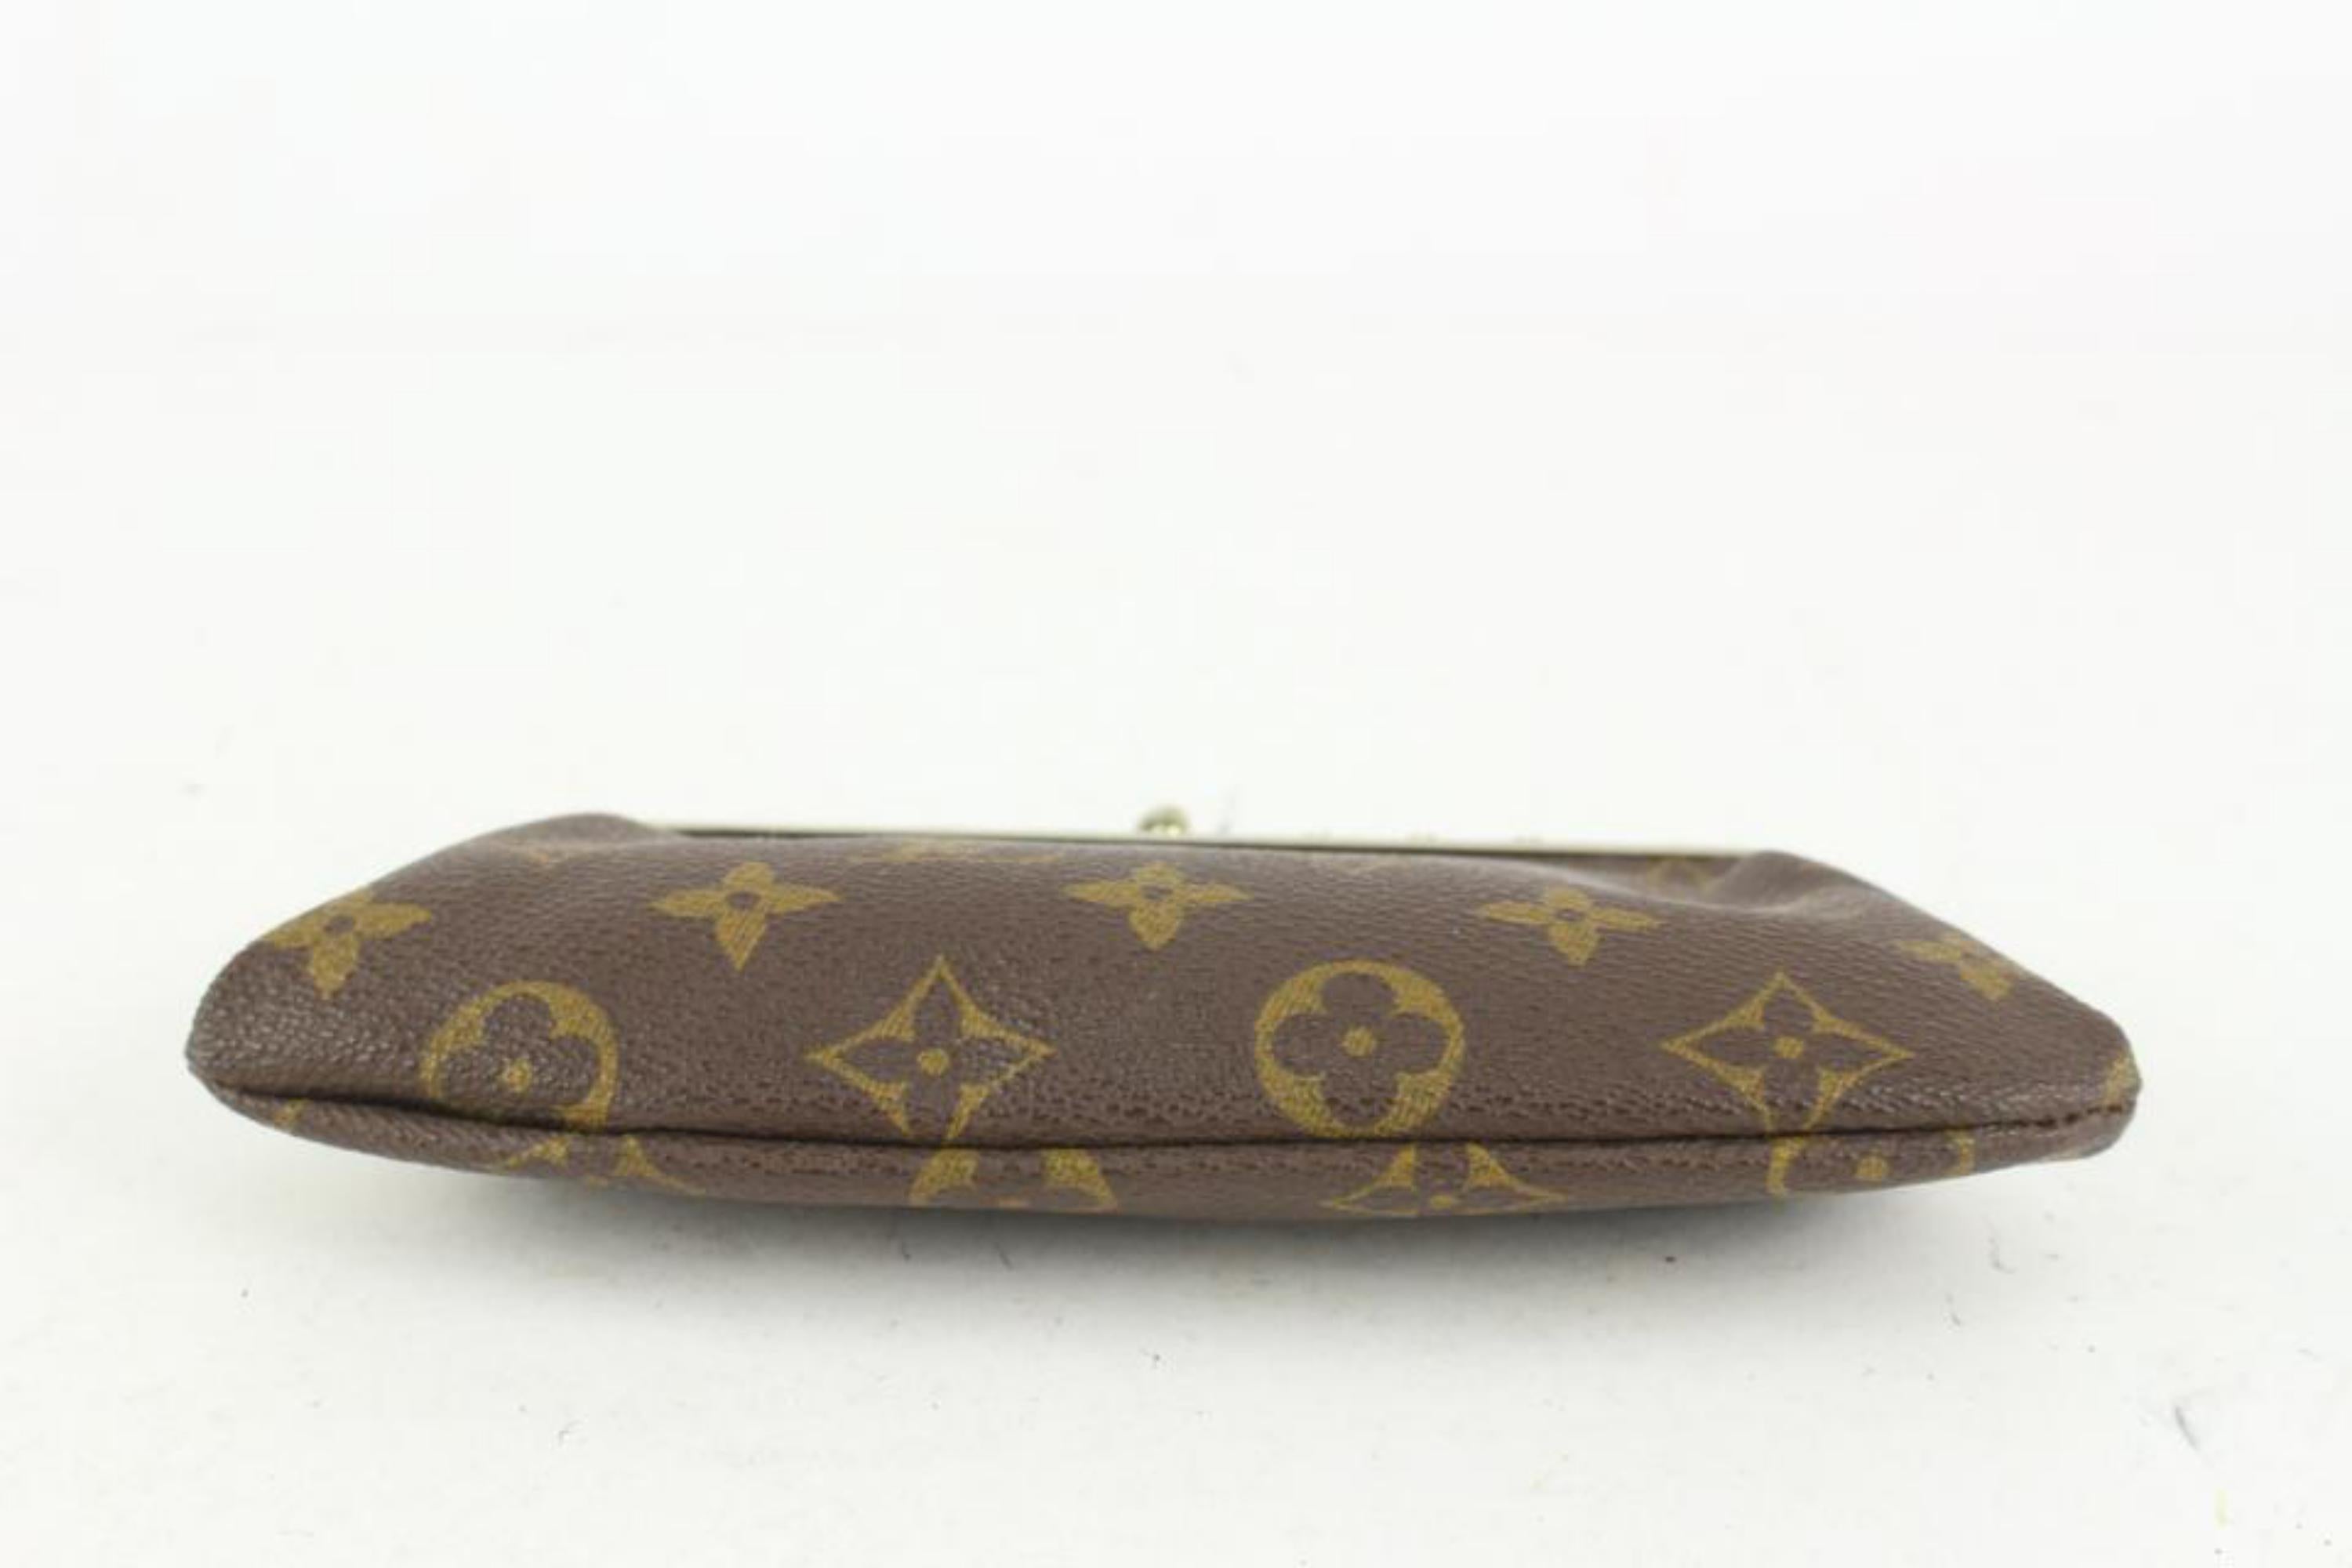 Louis Vuitton Monogram French Twist Pouch with Chain Kisslock Pochette 1028lv11 In Good Condition For Sale In Dix hills, NY